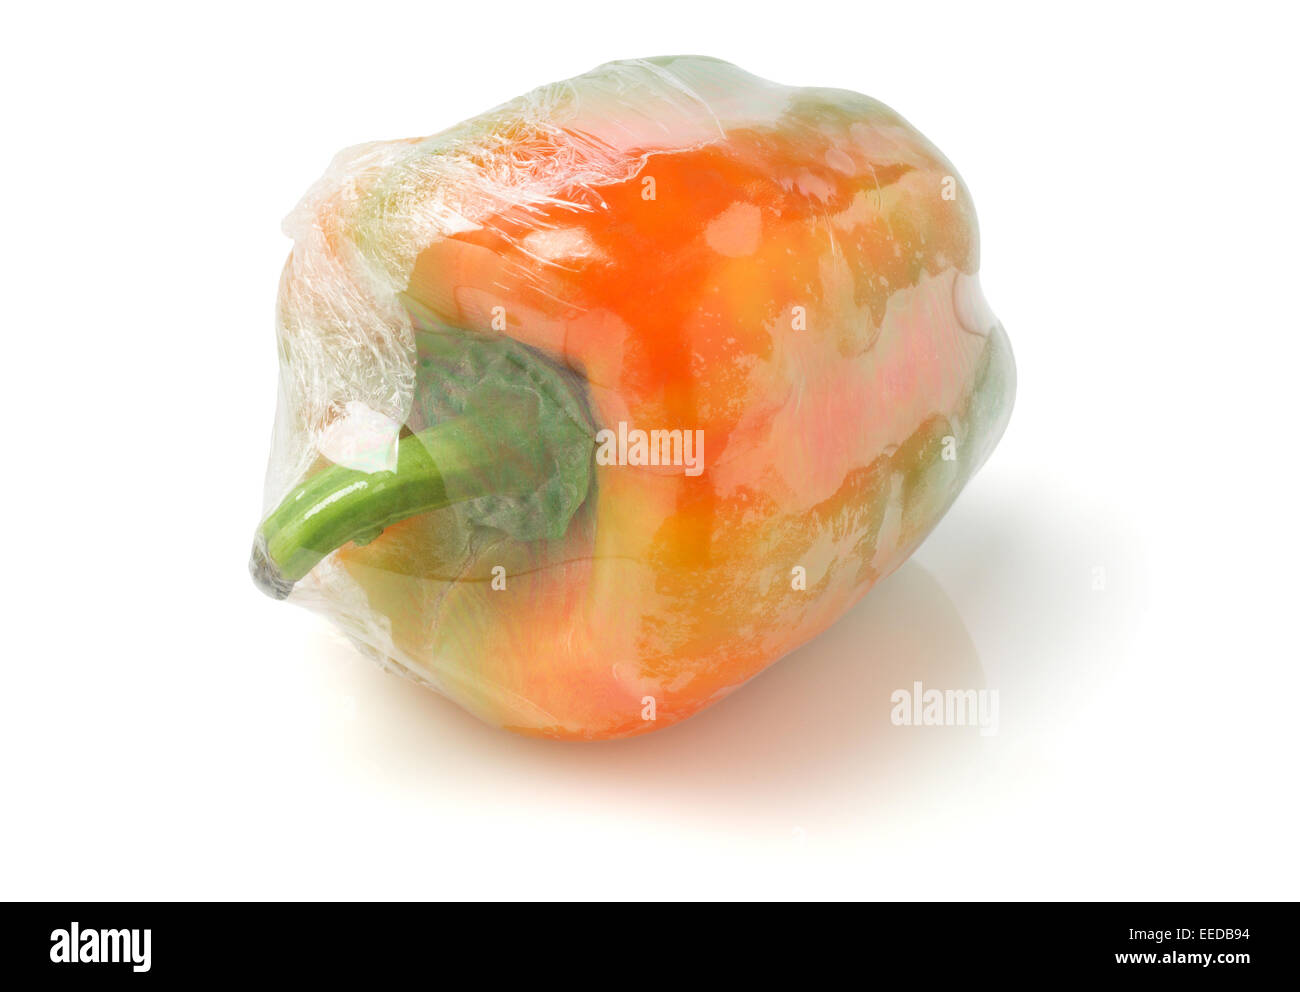 Fresh Pepper Wrapped In Cellophane Film On White Background Stock Photo